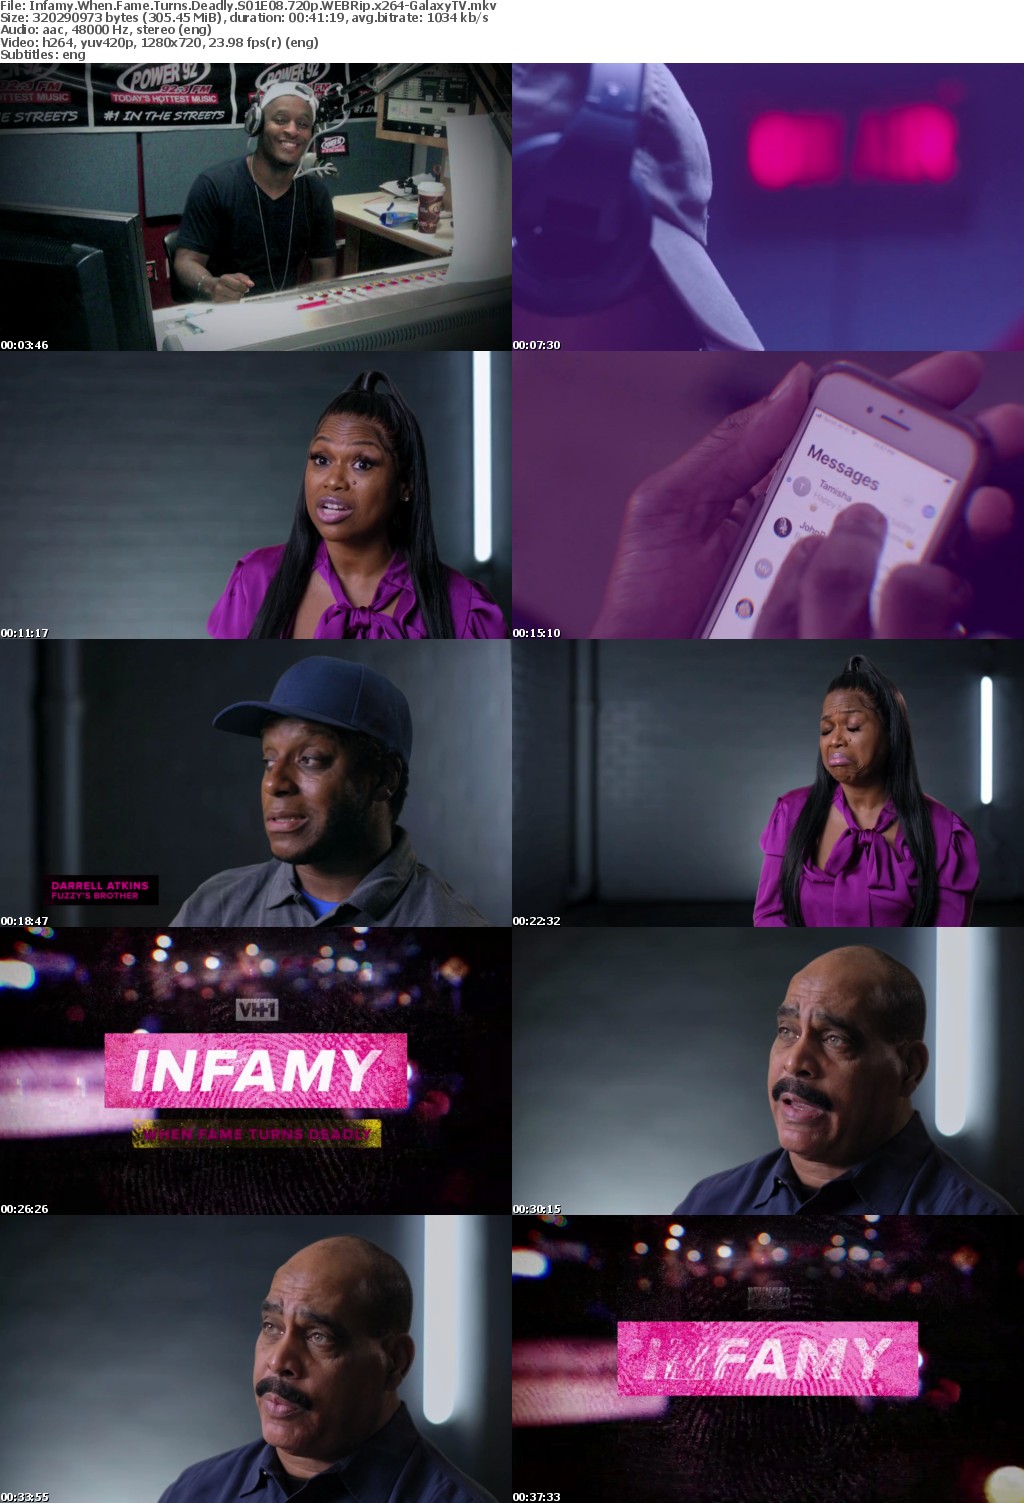 Infamy When Fame Turns Deadly S01 COMPLETE 720p WEBRip x264-GalaxyTV